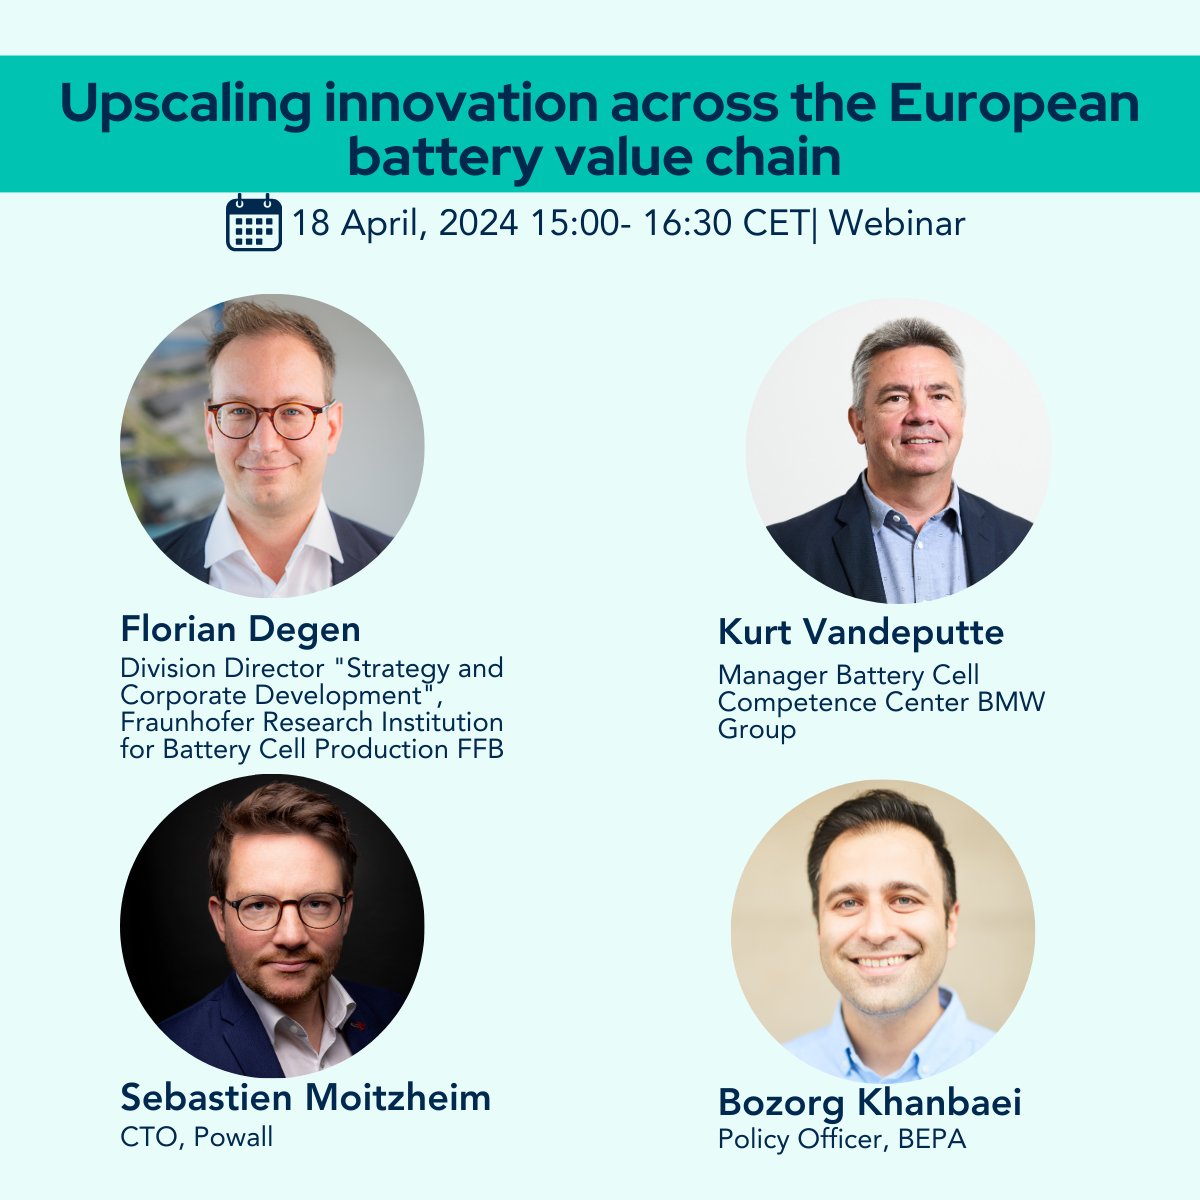 ⏰ Join us today for our webinar on Upscaling Innovation in the European #battery value chain, to learn more about bringing battery innovation from lab to market! 📅 Thursday, 18 April 2024, 15:00 CET 📌 Microsoft Teams Register here ➡ lnkd.in/gFphqsJa